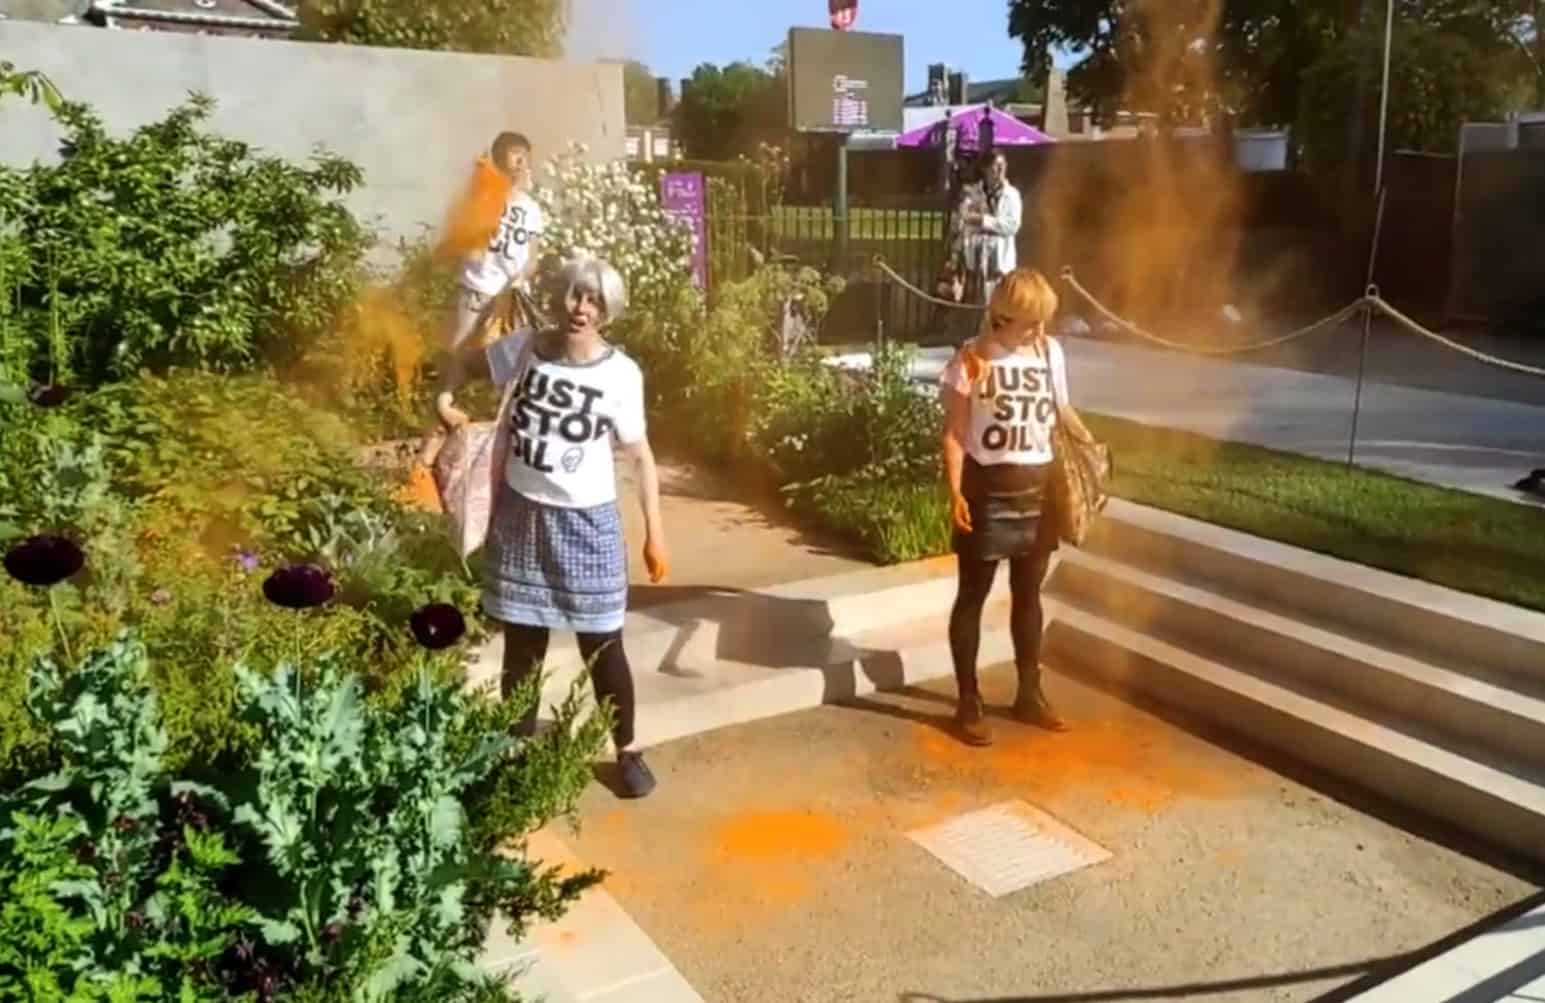 Just Stop Oil protesters spray orange powder over Chelsea Flower Show display